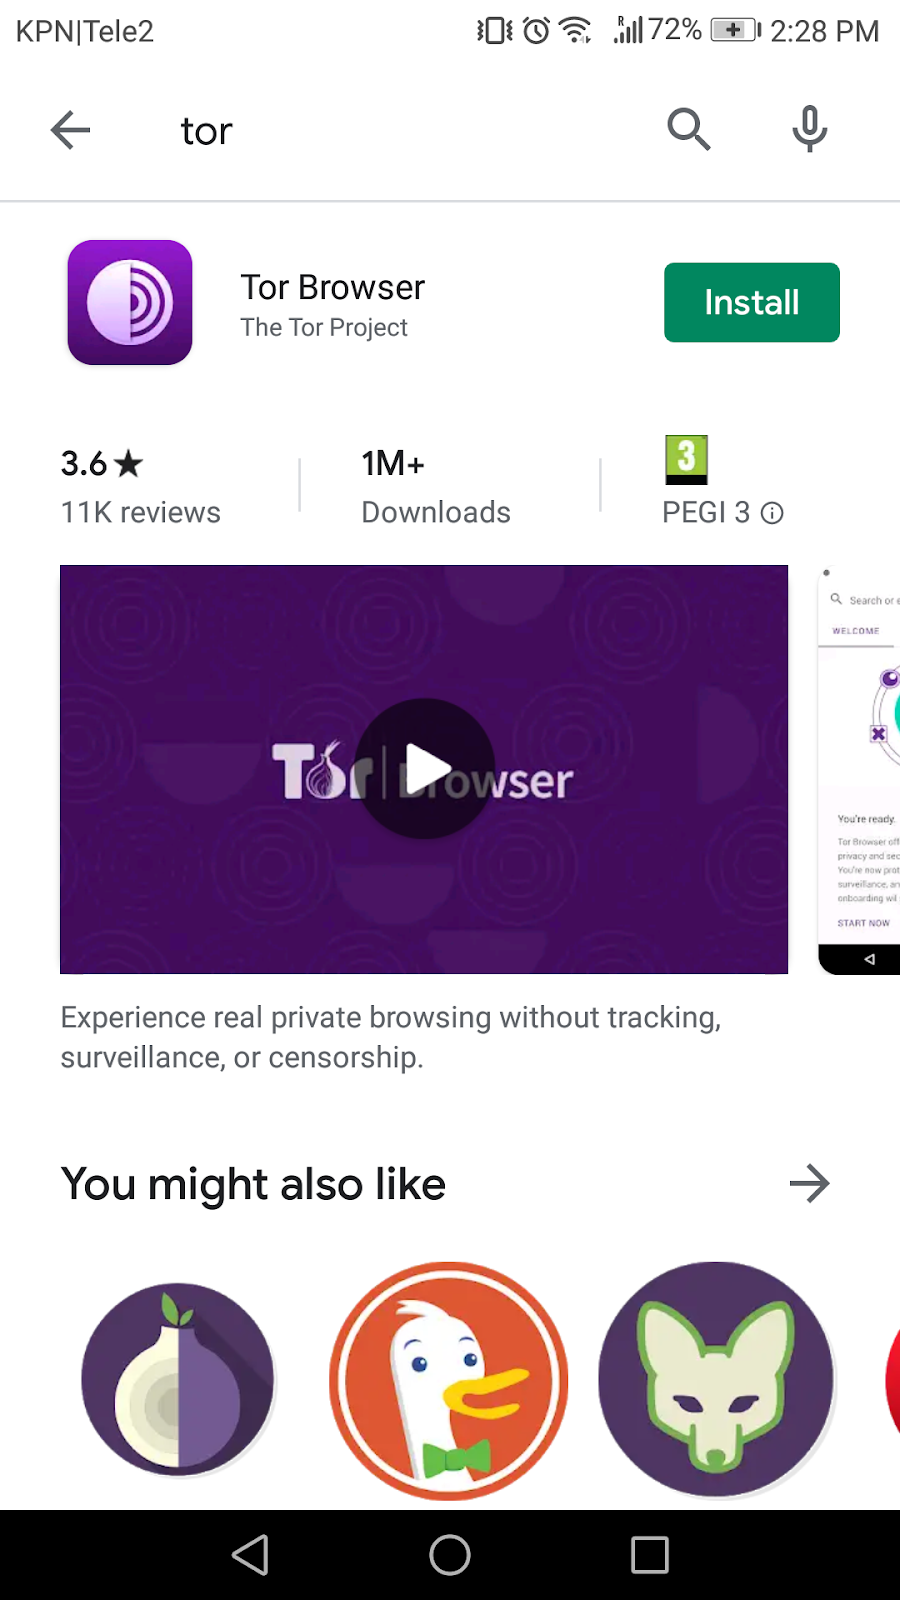 Tor Browser on GooglePlay store